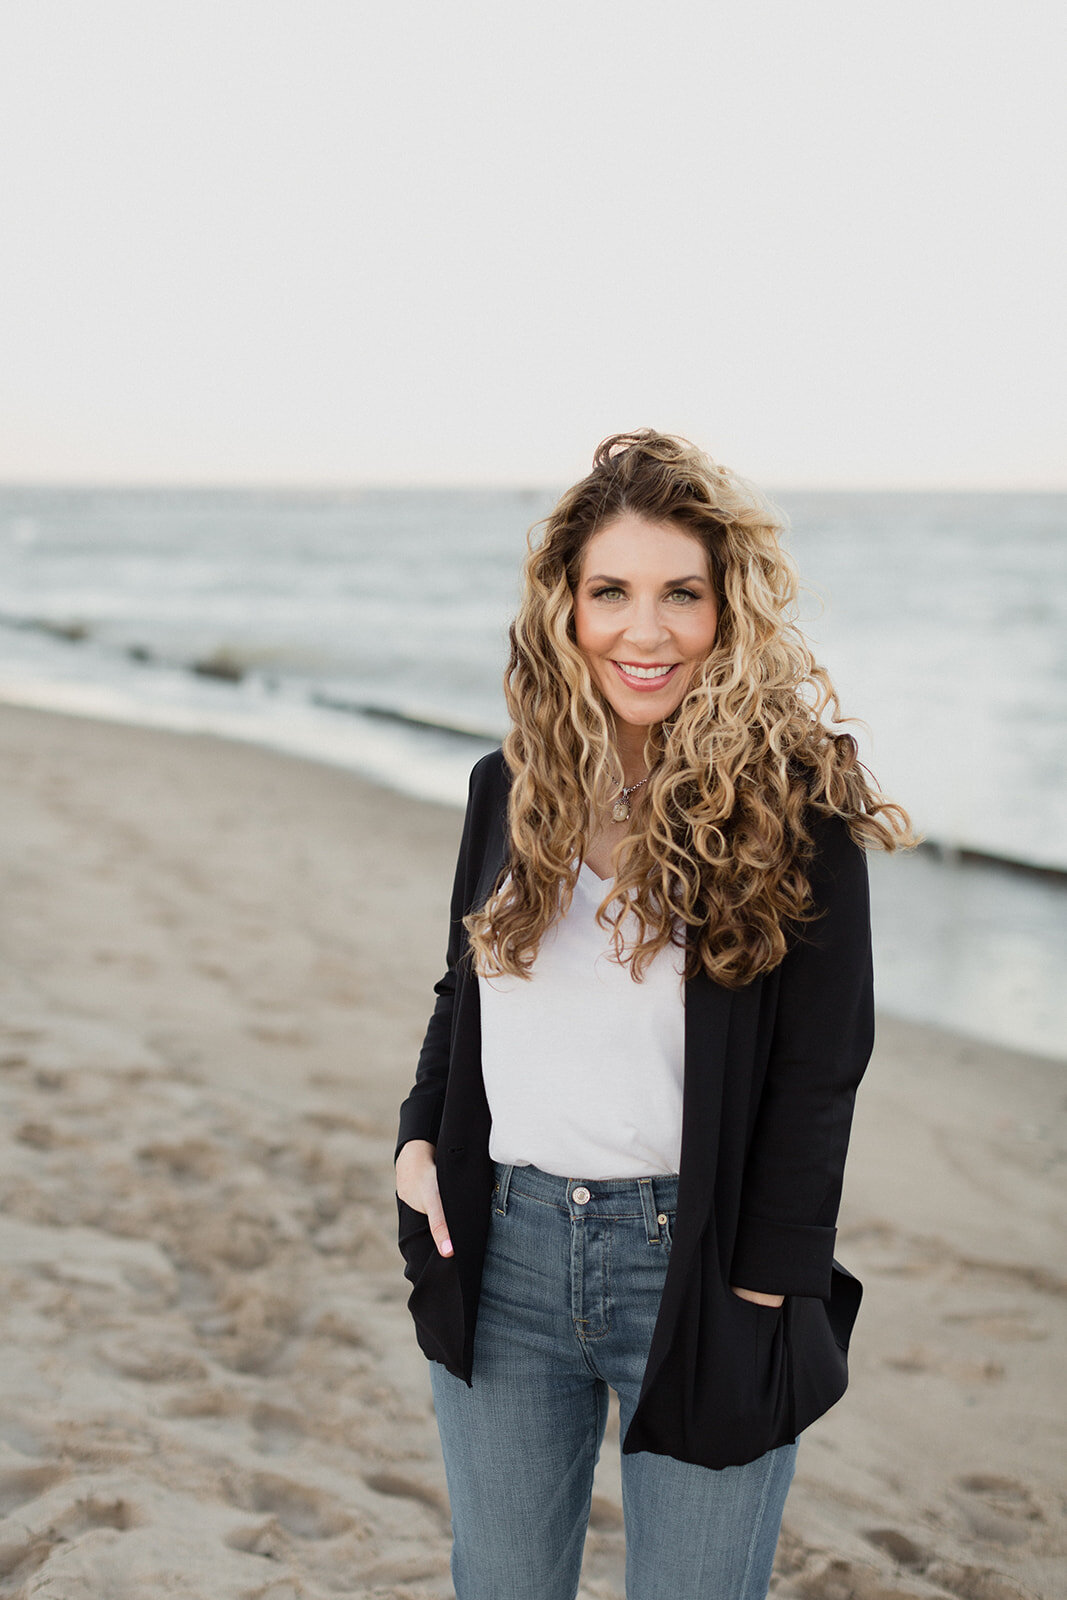 woman is on beach, portrait of her looking at camera and smiling. She is wearing a black cardigan, white tee and jeans with her hands in her sweater pockets.